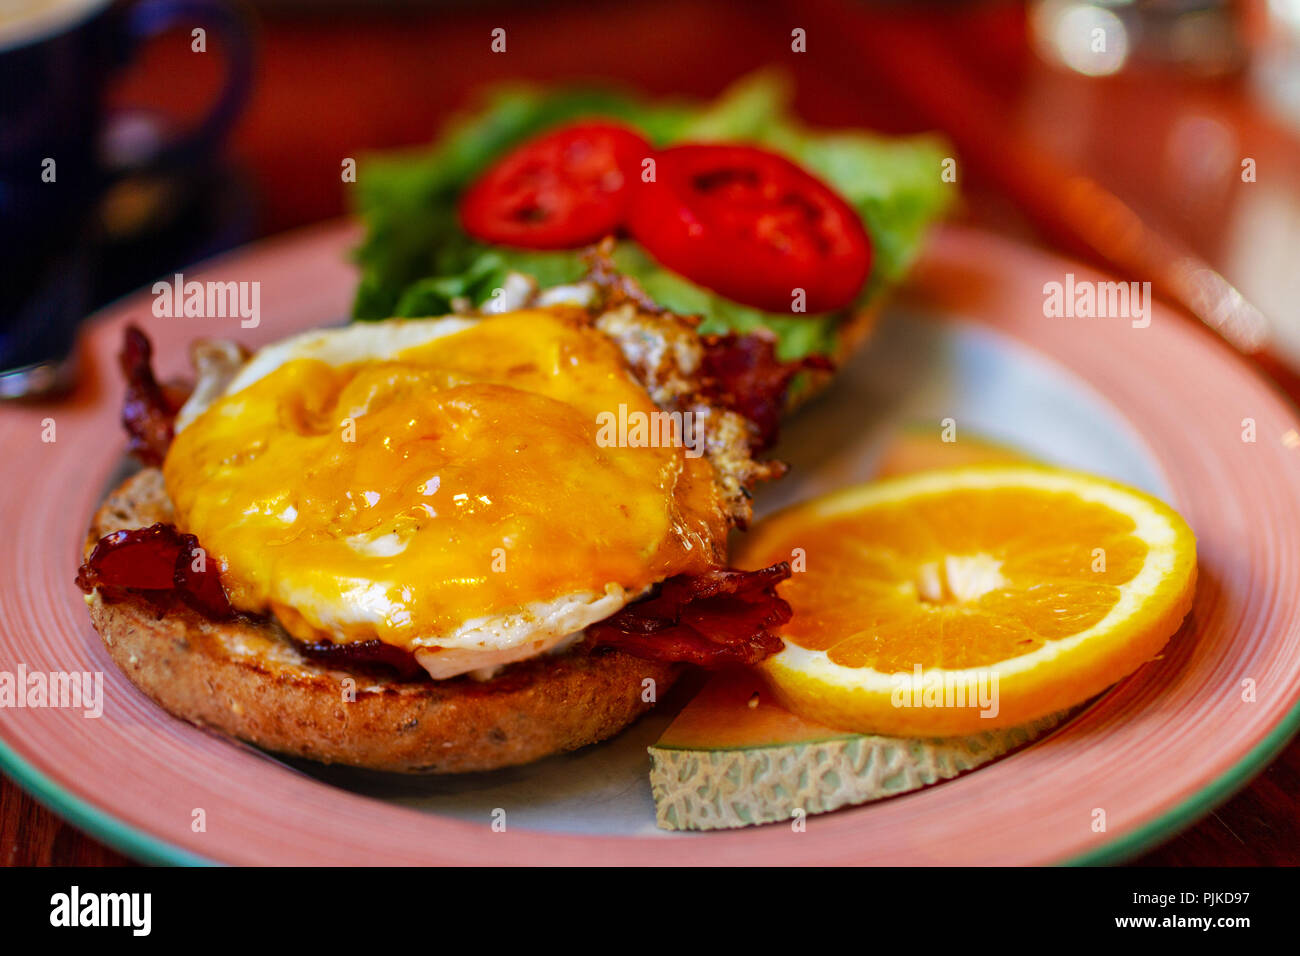 Breakfast toasted bagel bun served with bacon, sausage and egg sandwich with fruits. Stock Photo